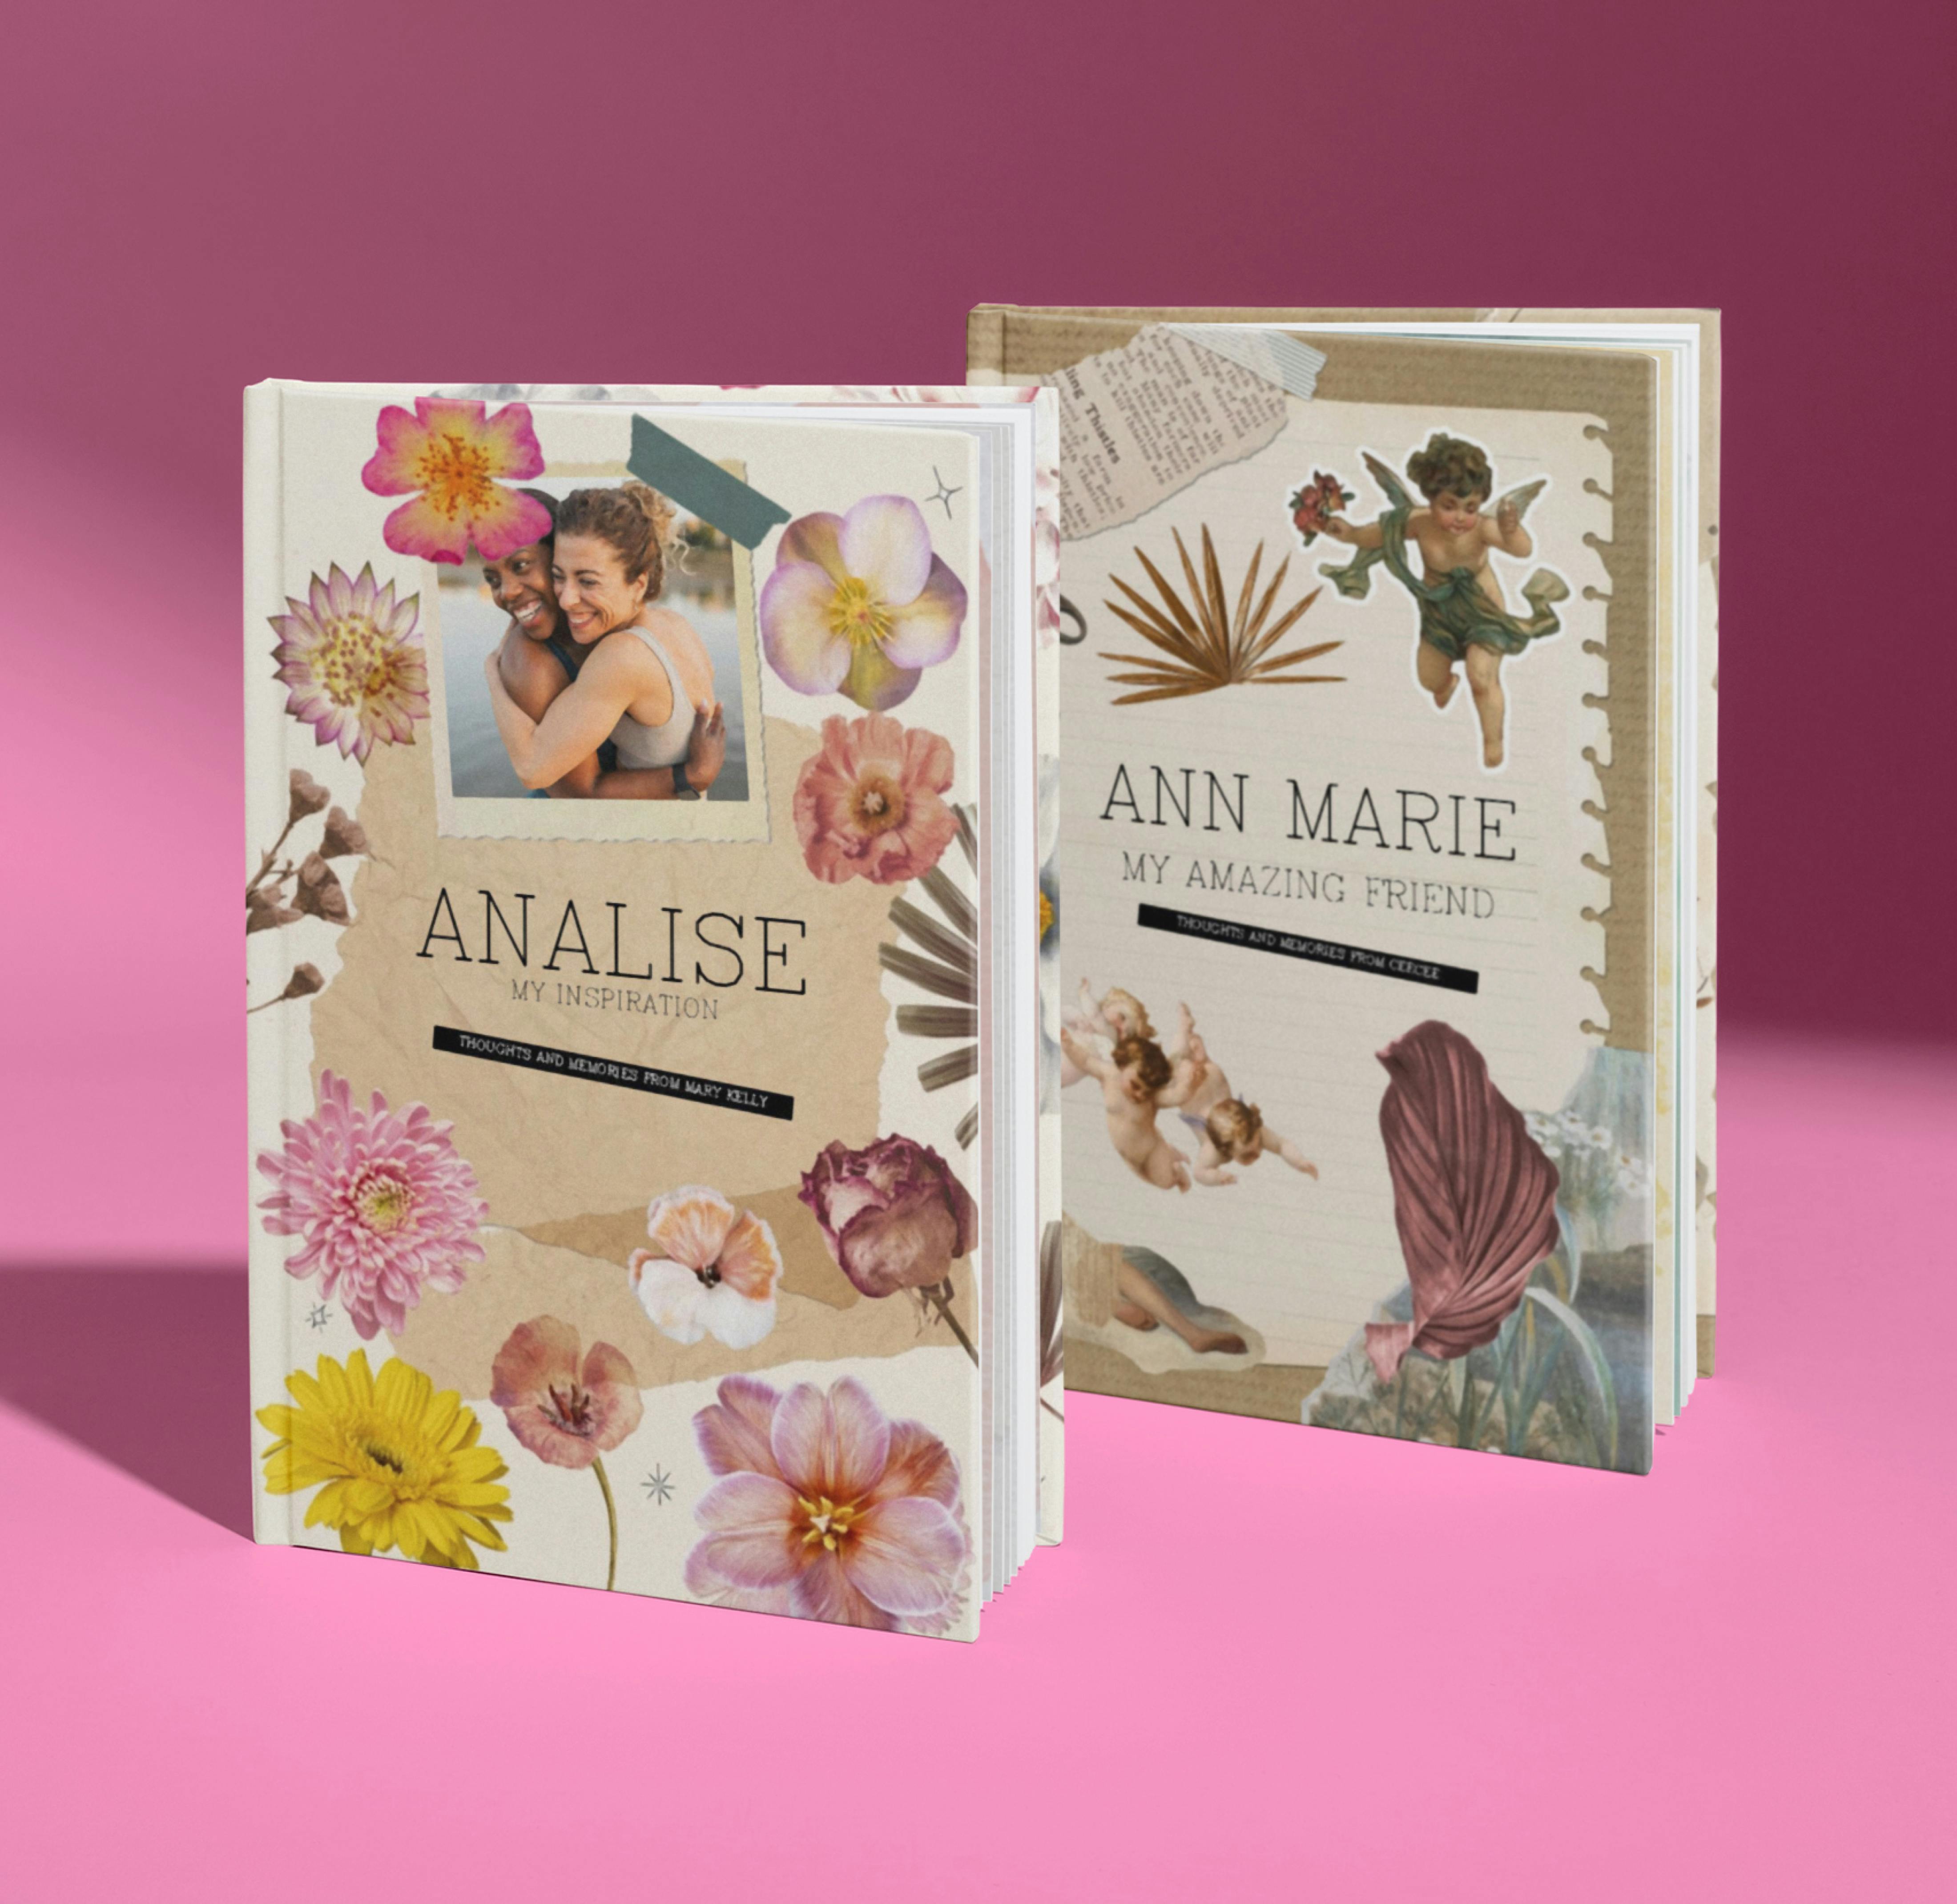 Two personalised friendship book covers